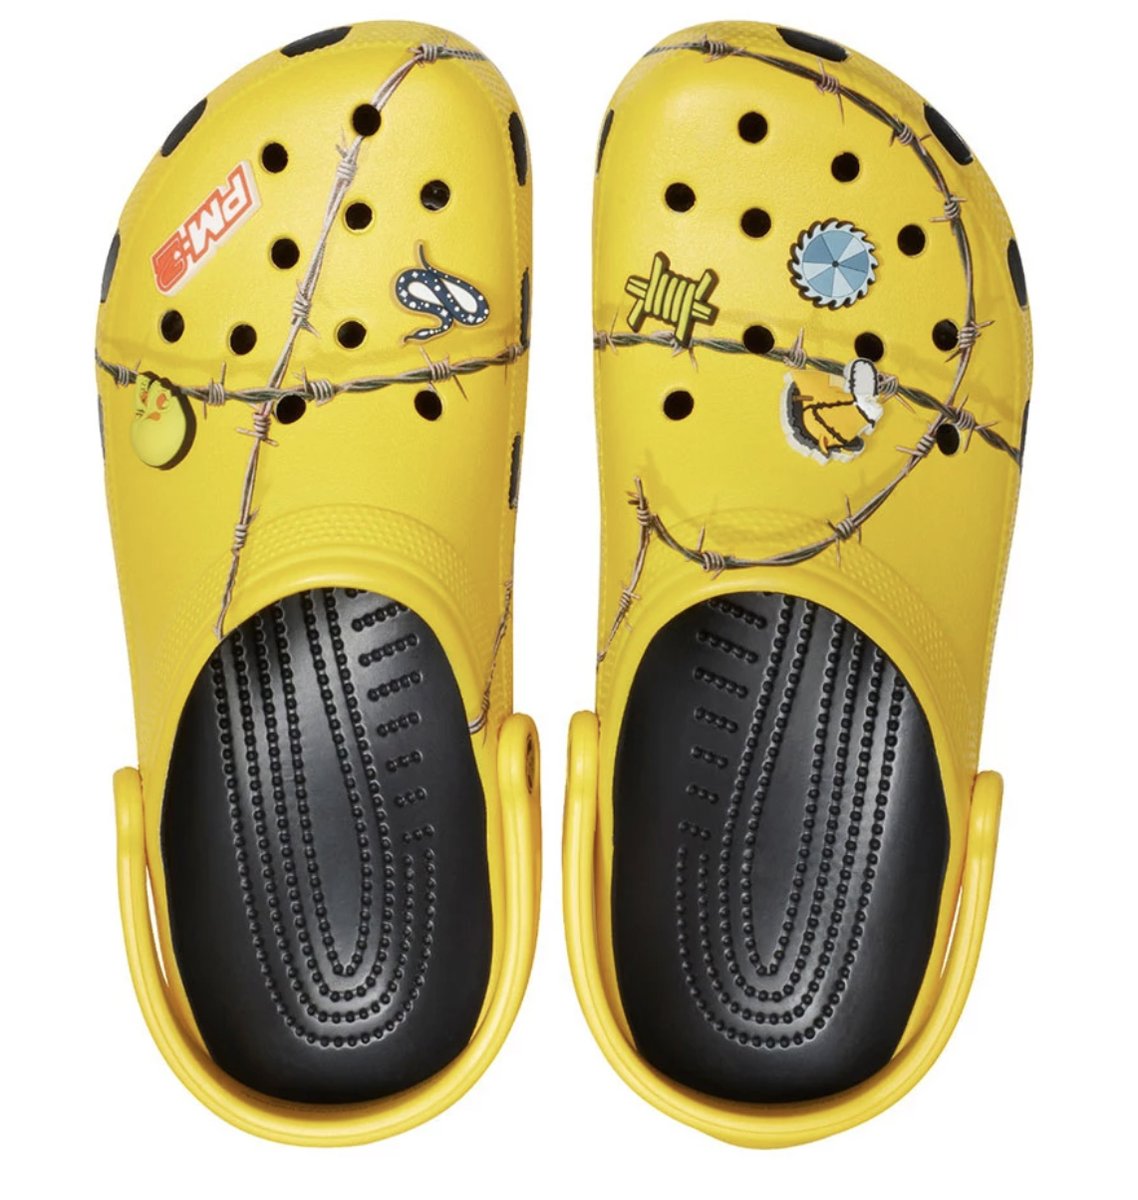 Post Malone’s second round of Crocs sold out in less than 10 minutes ...